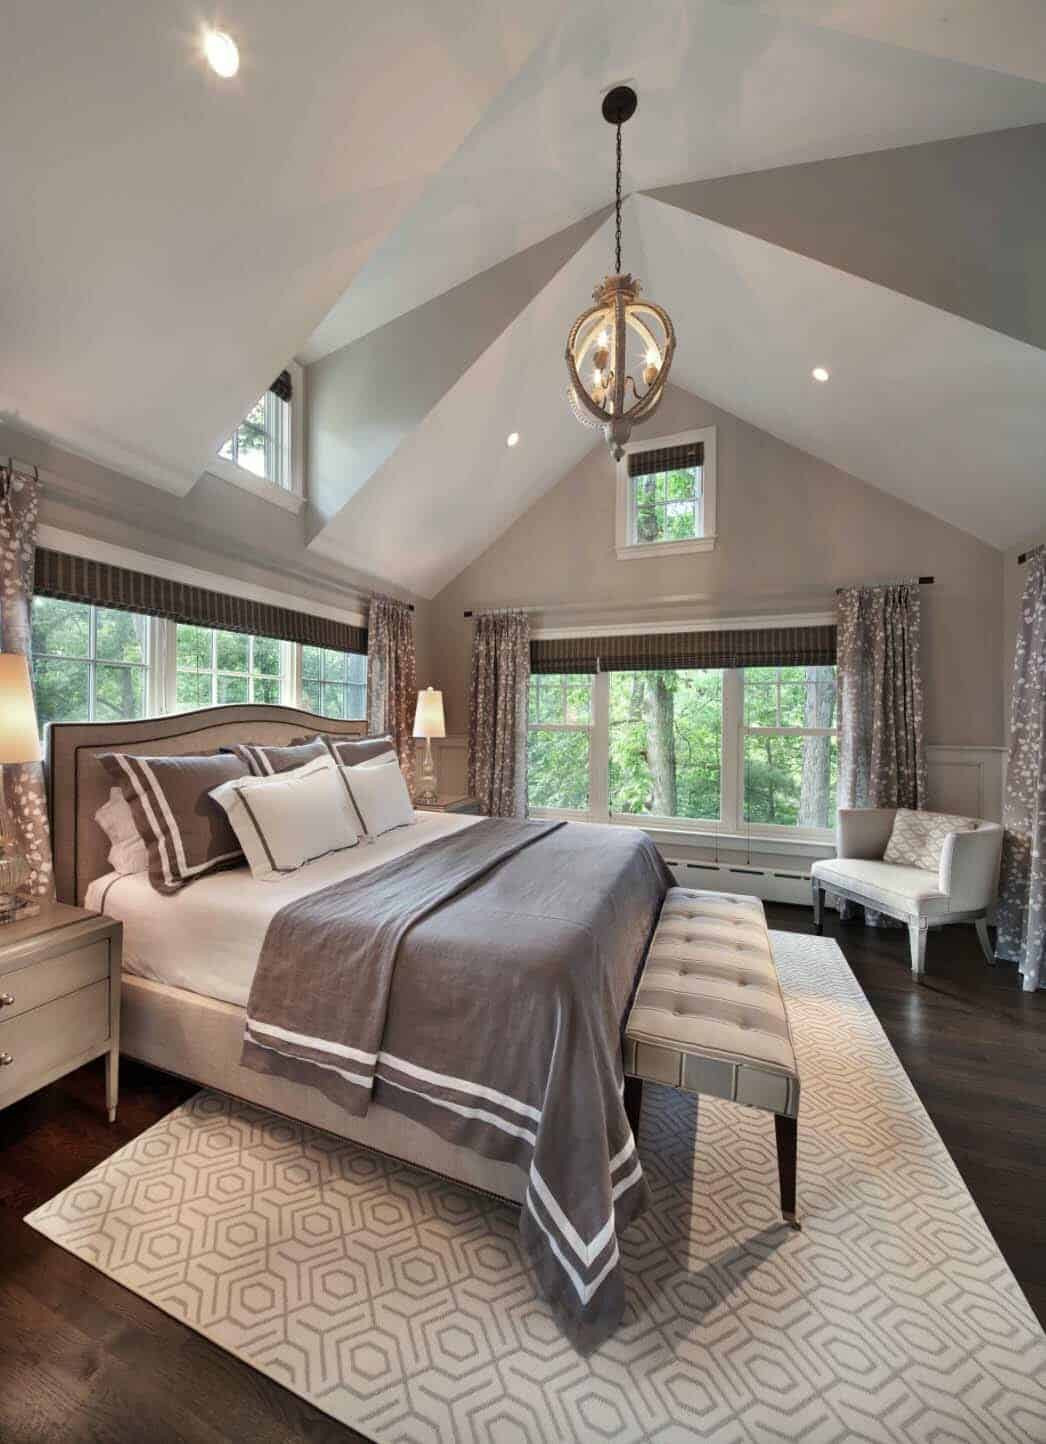 Master Bedroom Paint Color Ideas
 25 Absolutely stunning master bedroom color scheme ideas